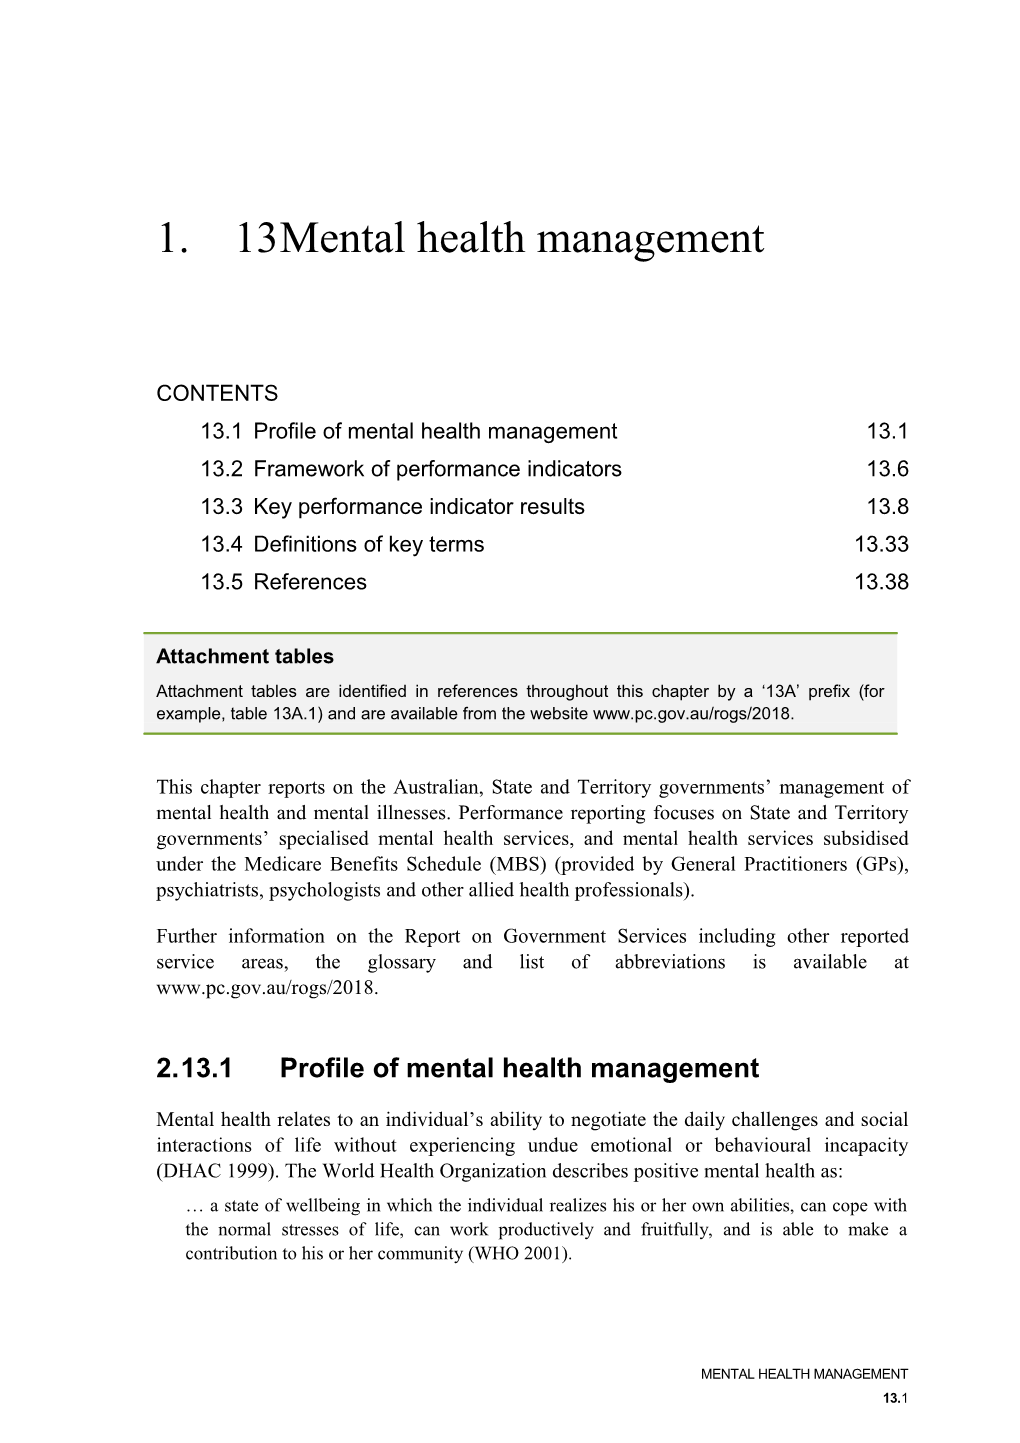 Chapter 13 - Mental Health Management - Report on Government Services 2018